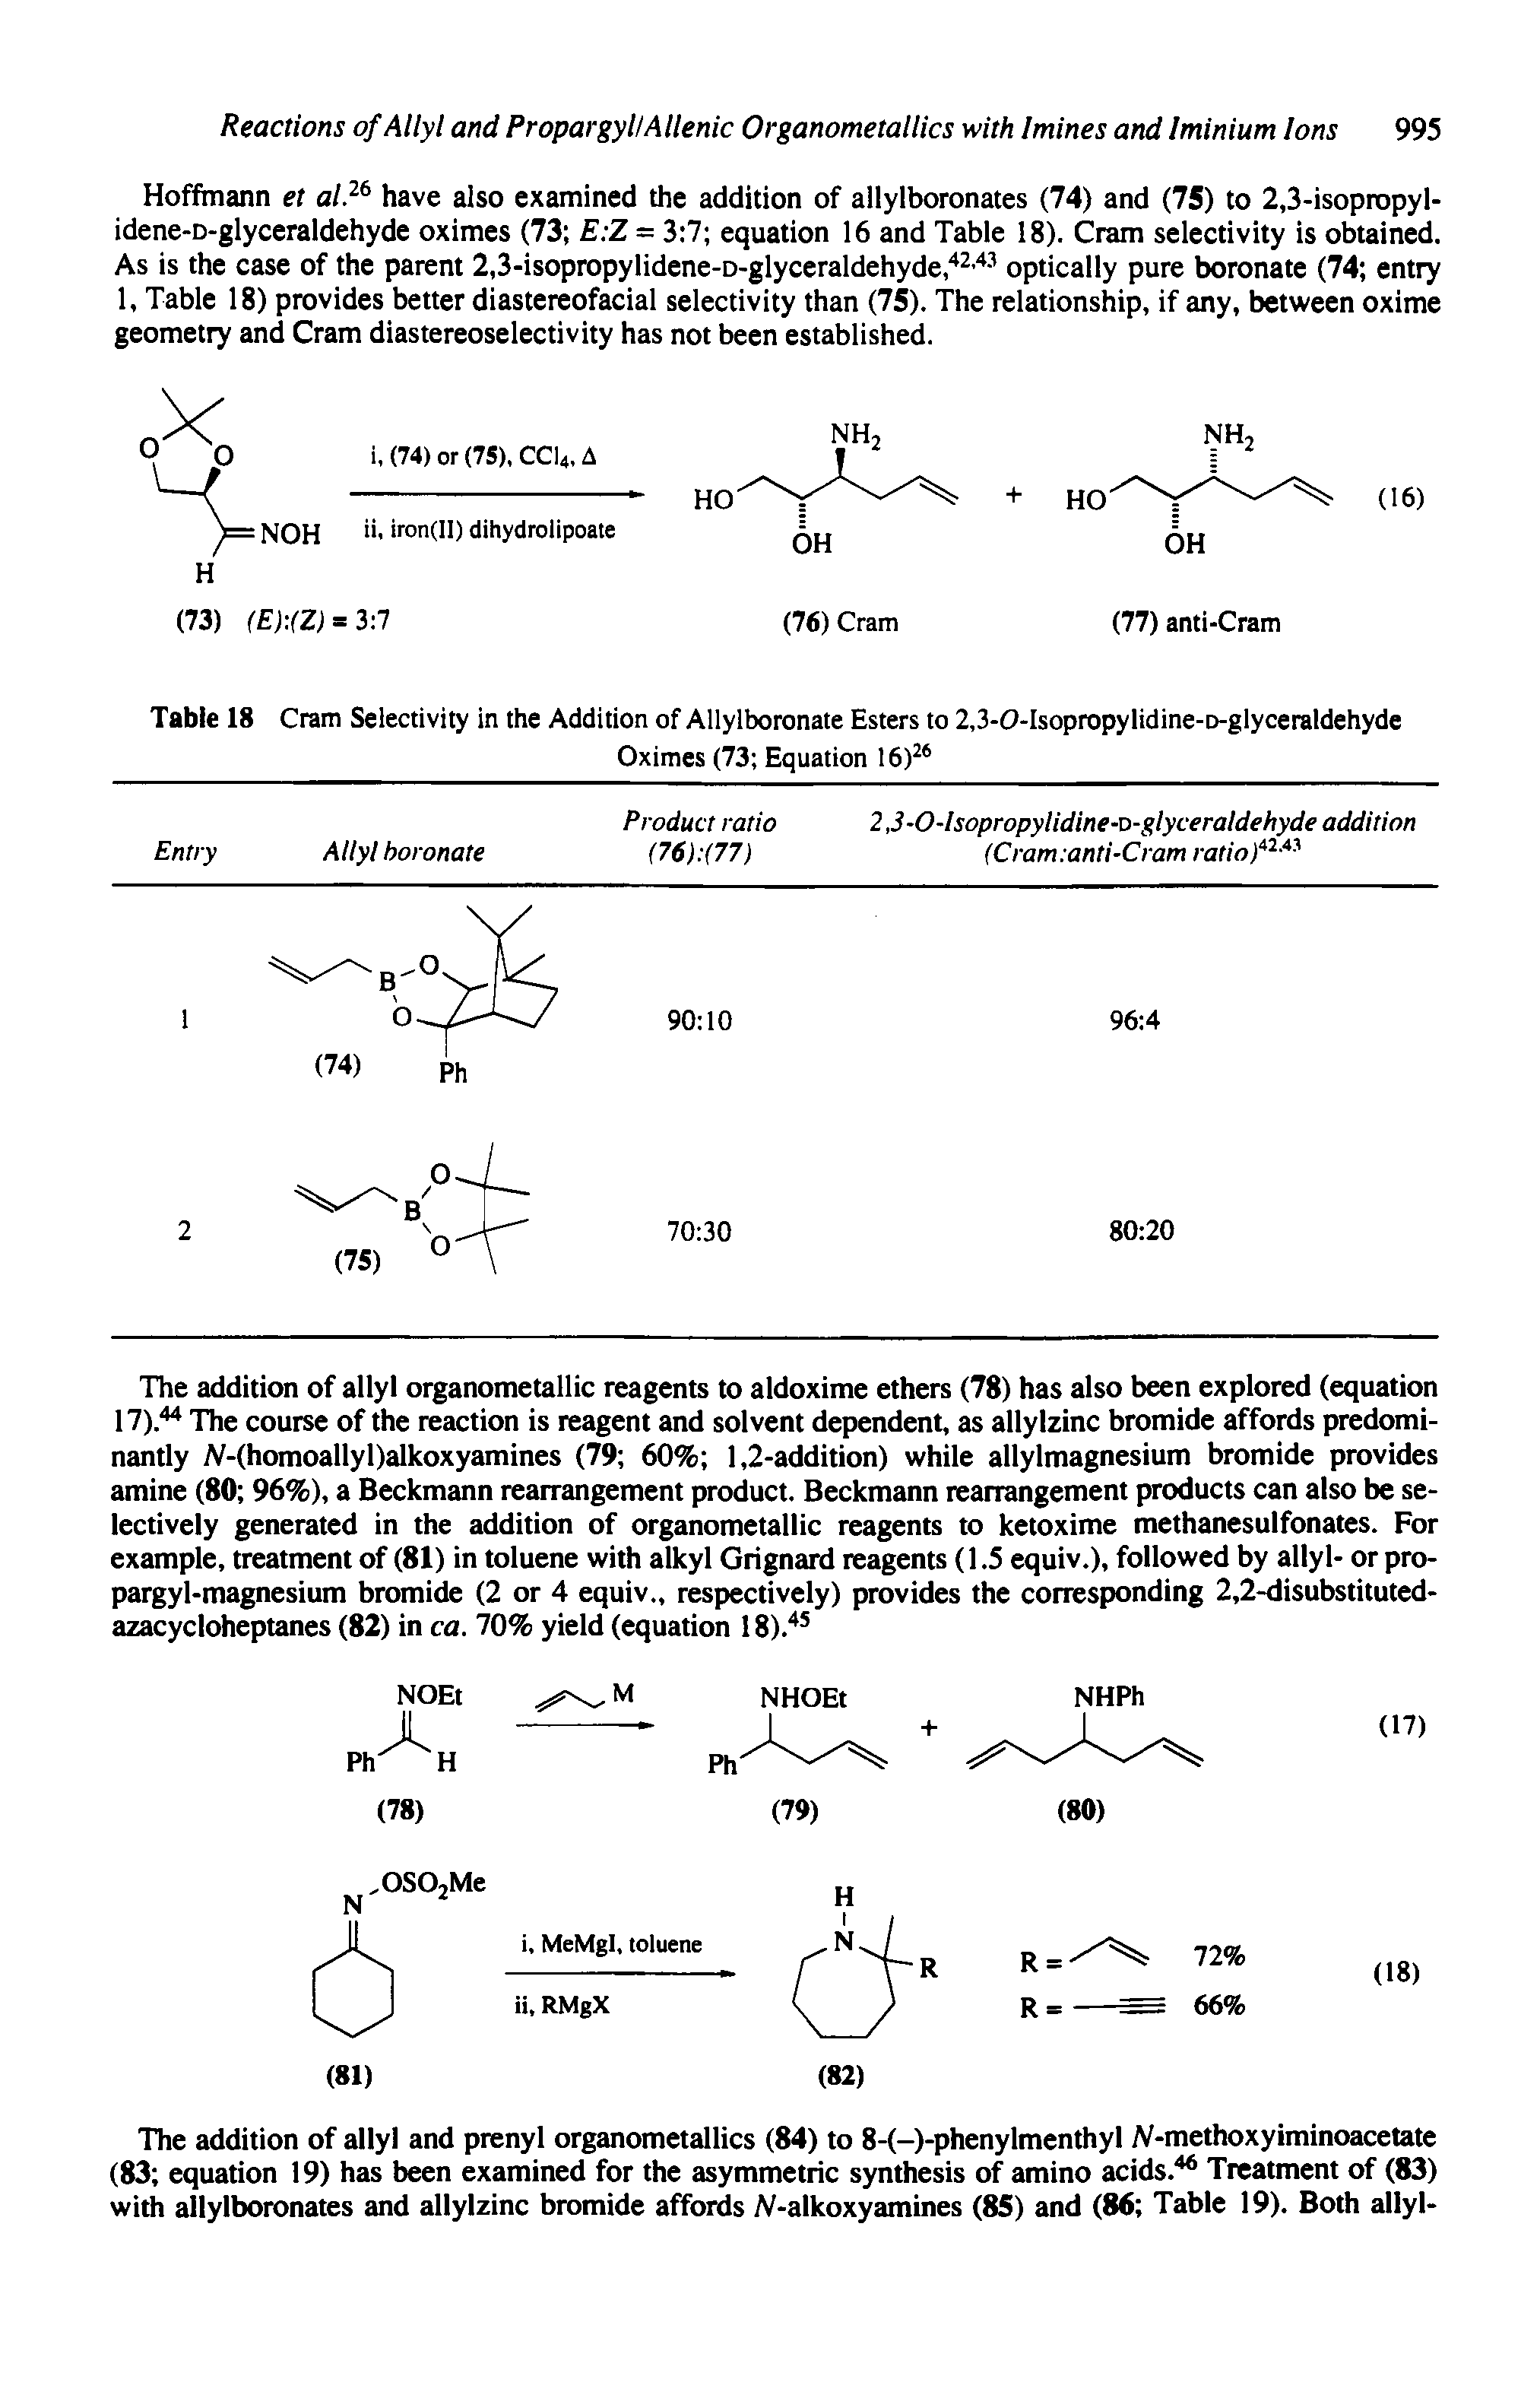 Table 18 Cram Selectivity in the Addition of Allylboronate Esters to 2,3-0-Isopropylidine-D-glyceraldehyde...